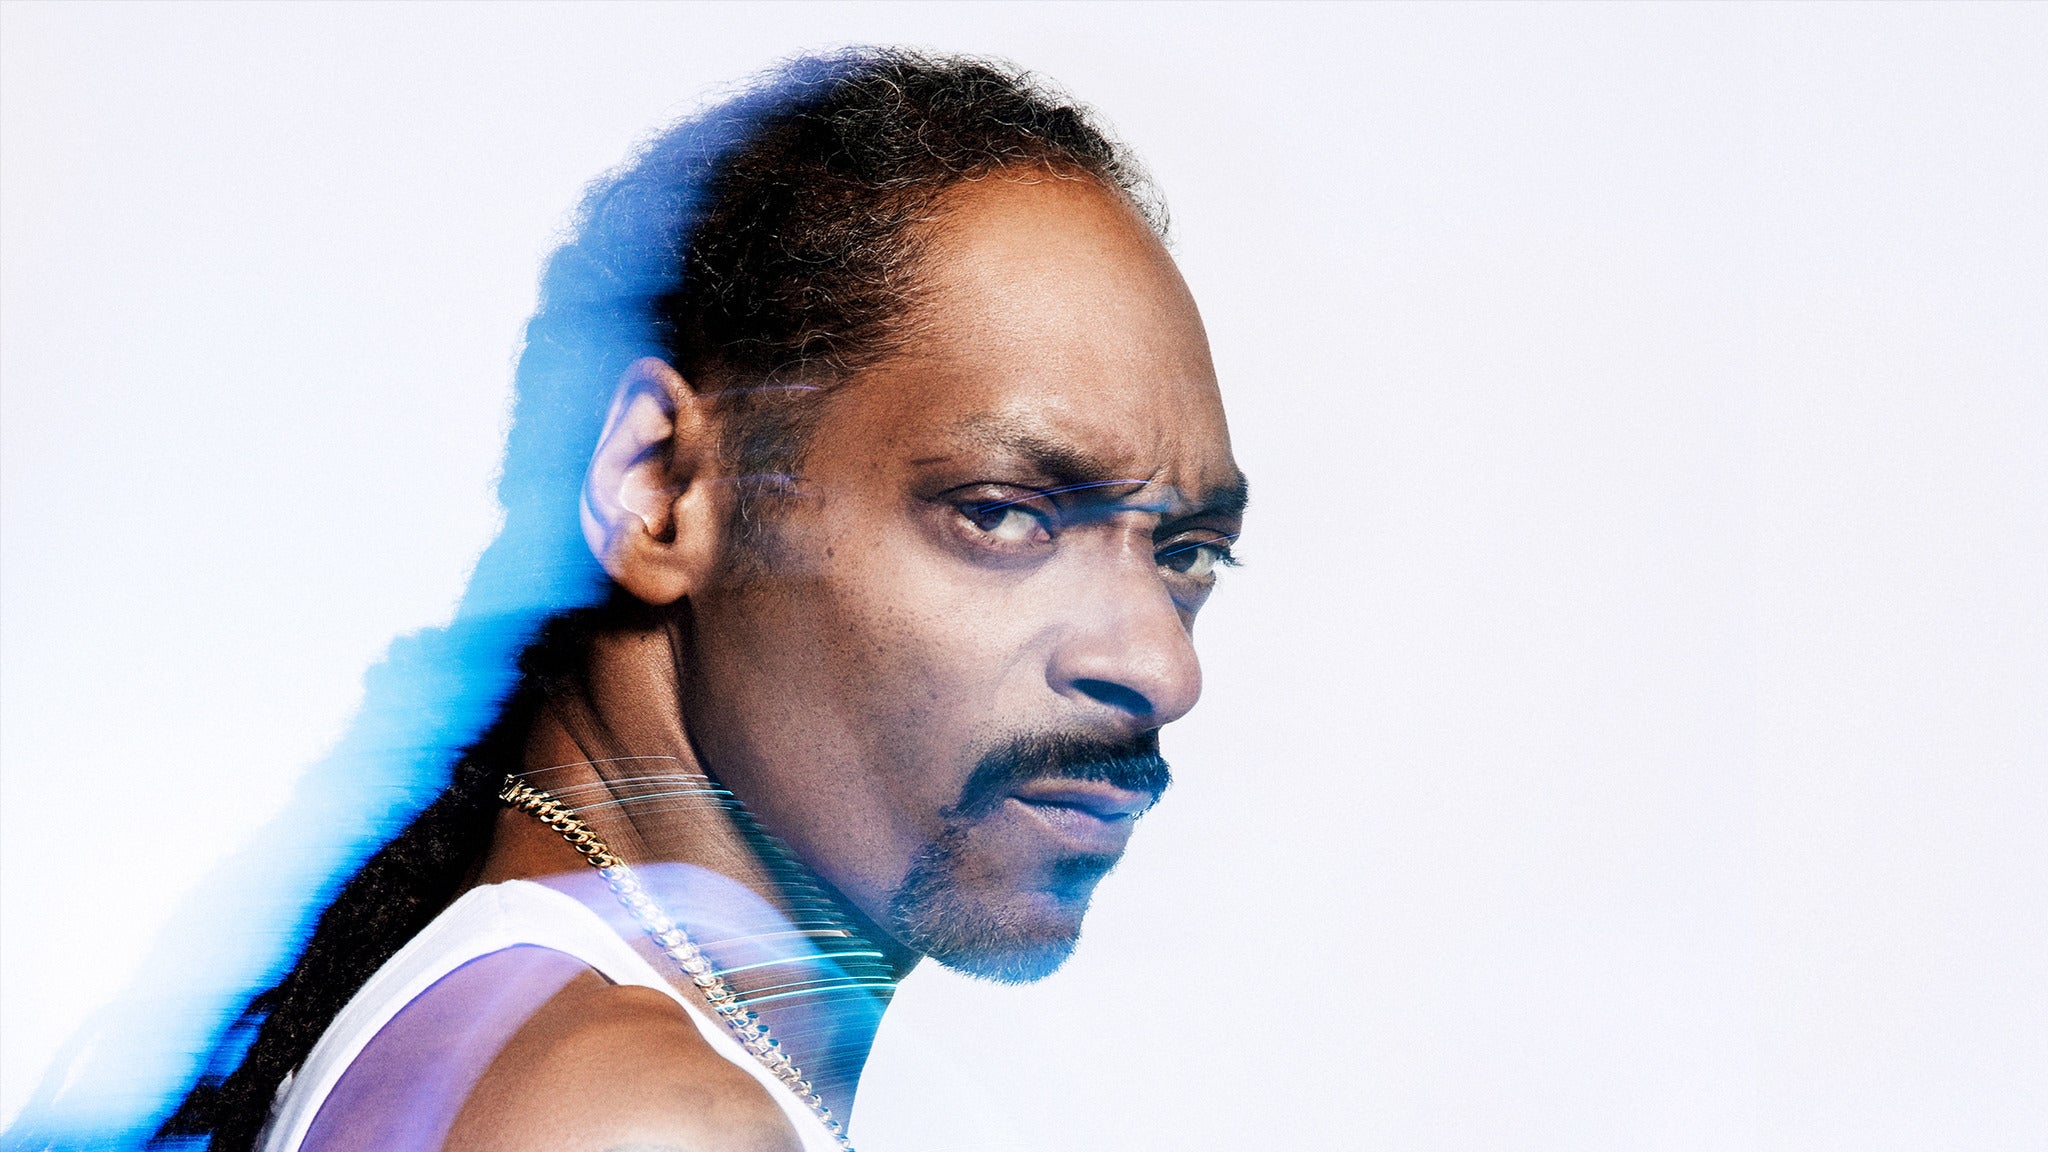 Snoop Dogg with Nelly & Ying Yang Twins pre-sale code for genuine tickets in Jacksonville